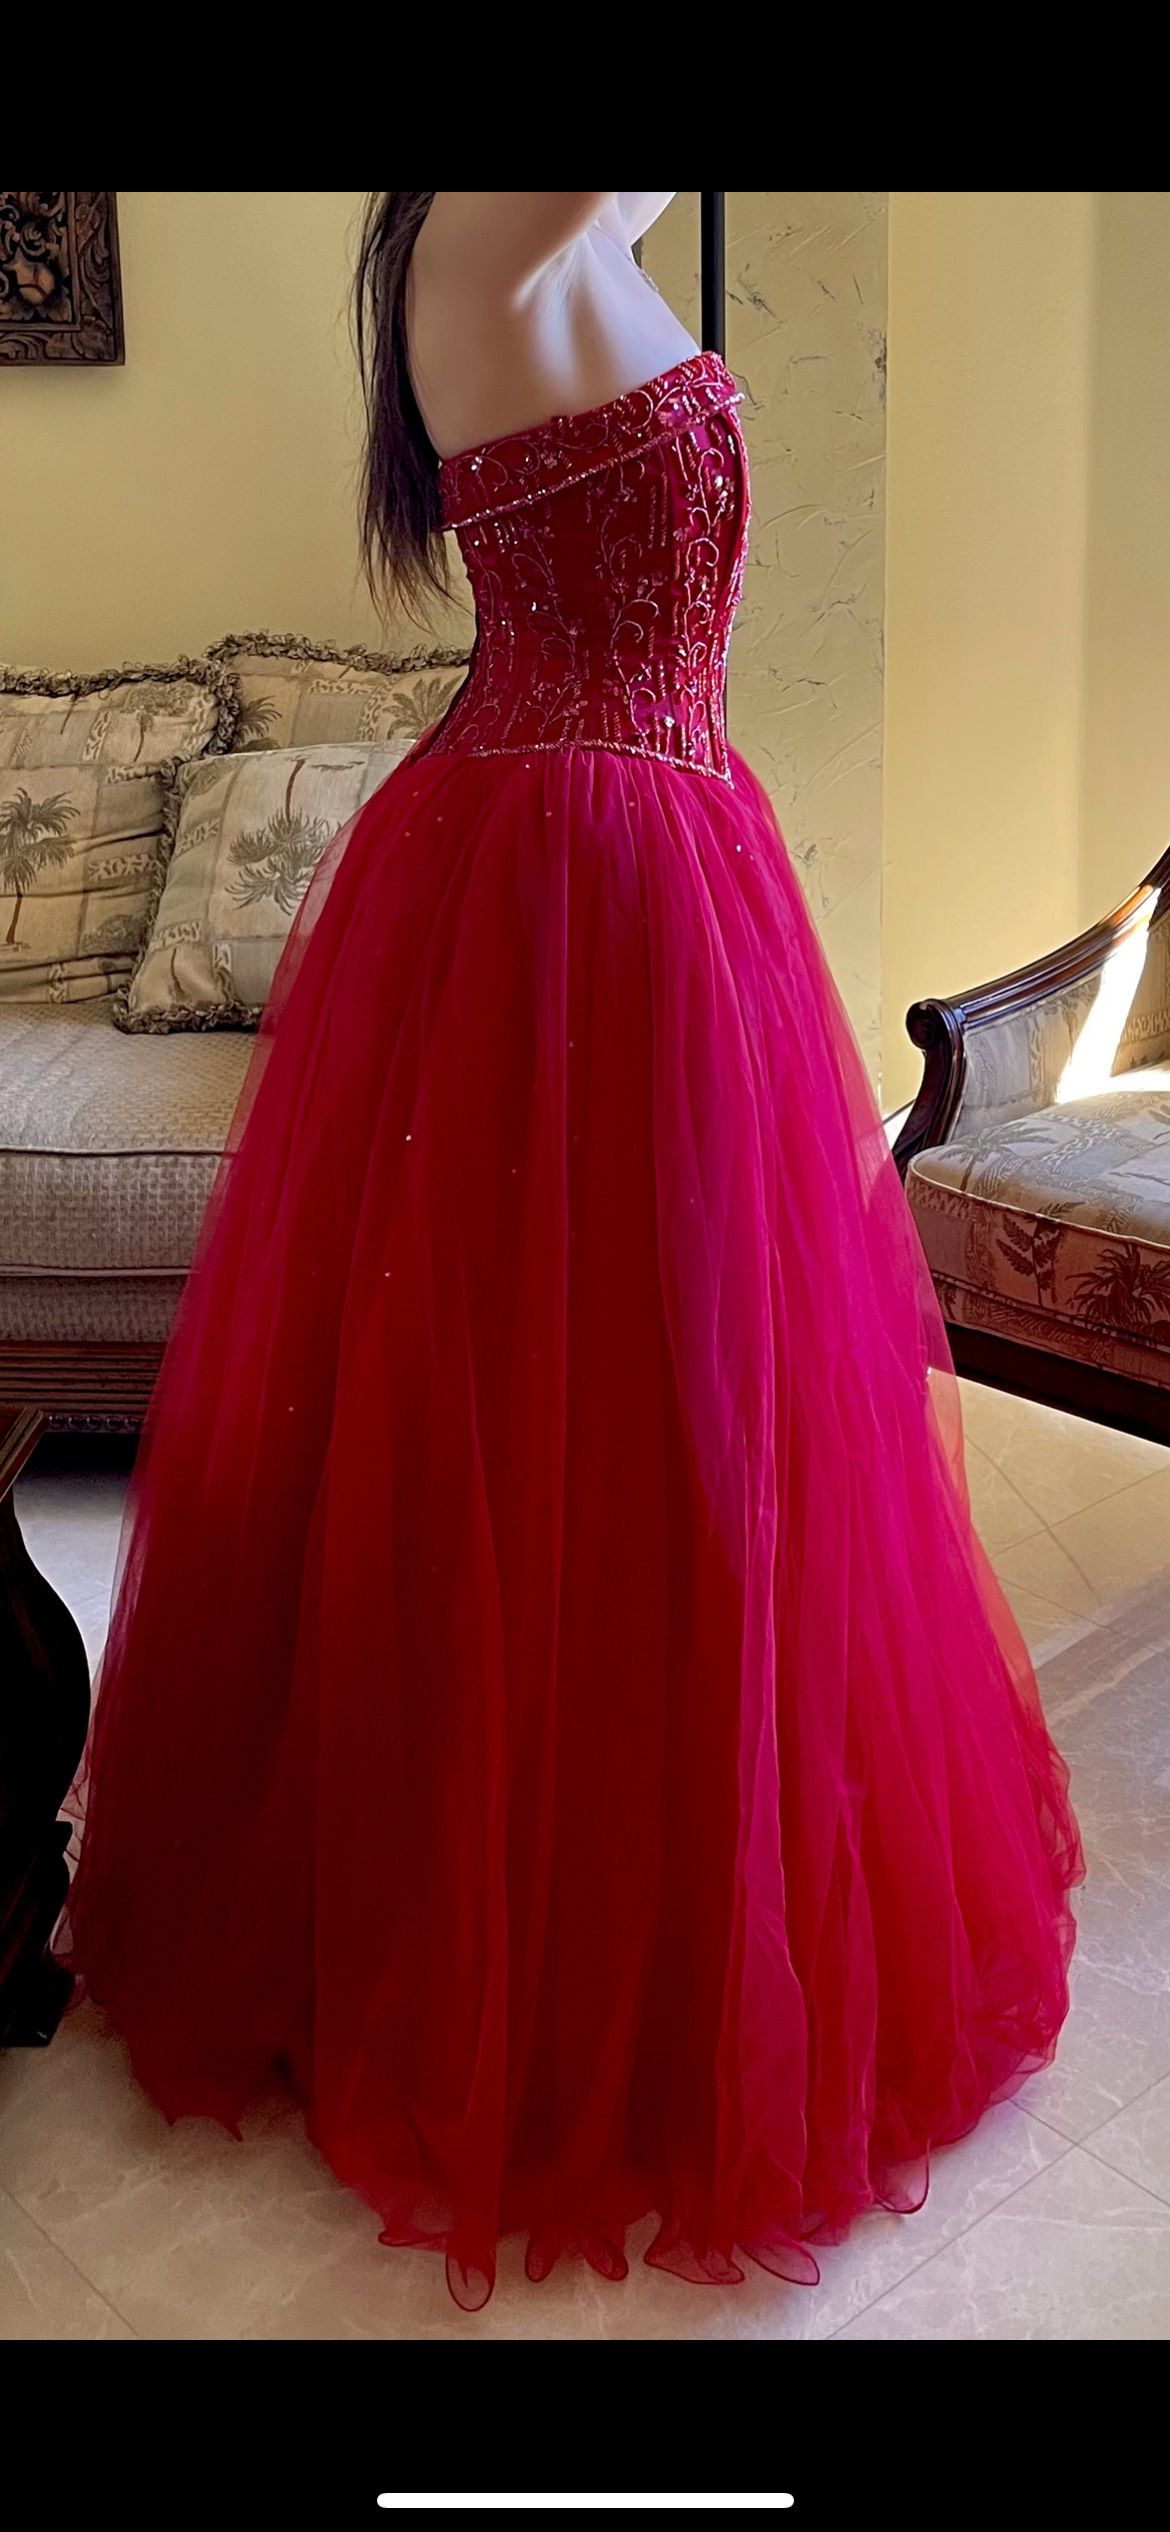 David's Bridal Size 4 Prom Strapless Red Ball Gown on Queenly